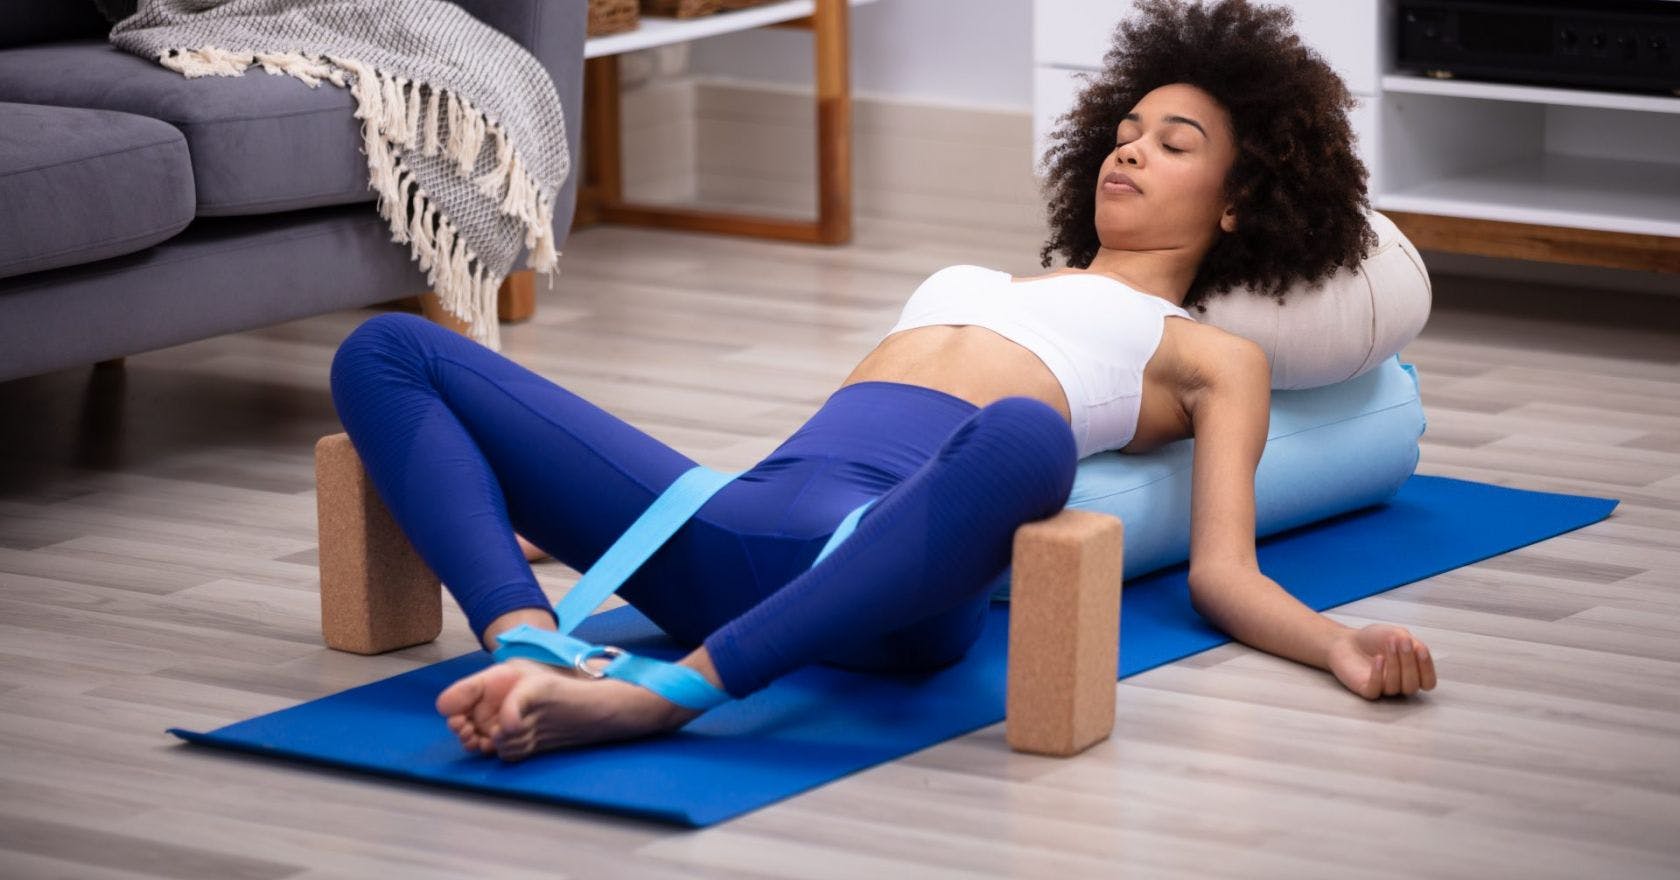 Stretching: how to use yoga equipment to enhance your flexibility